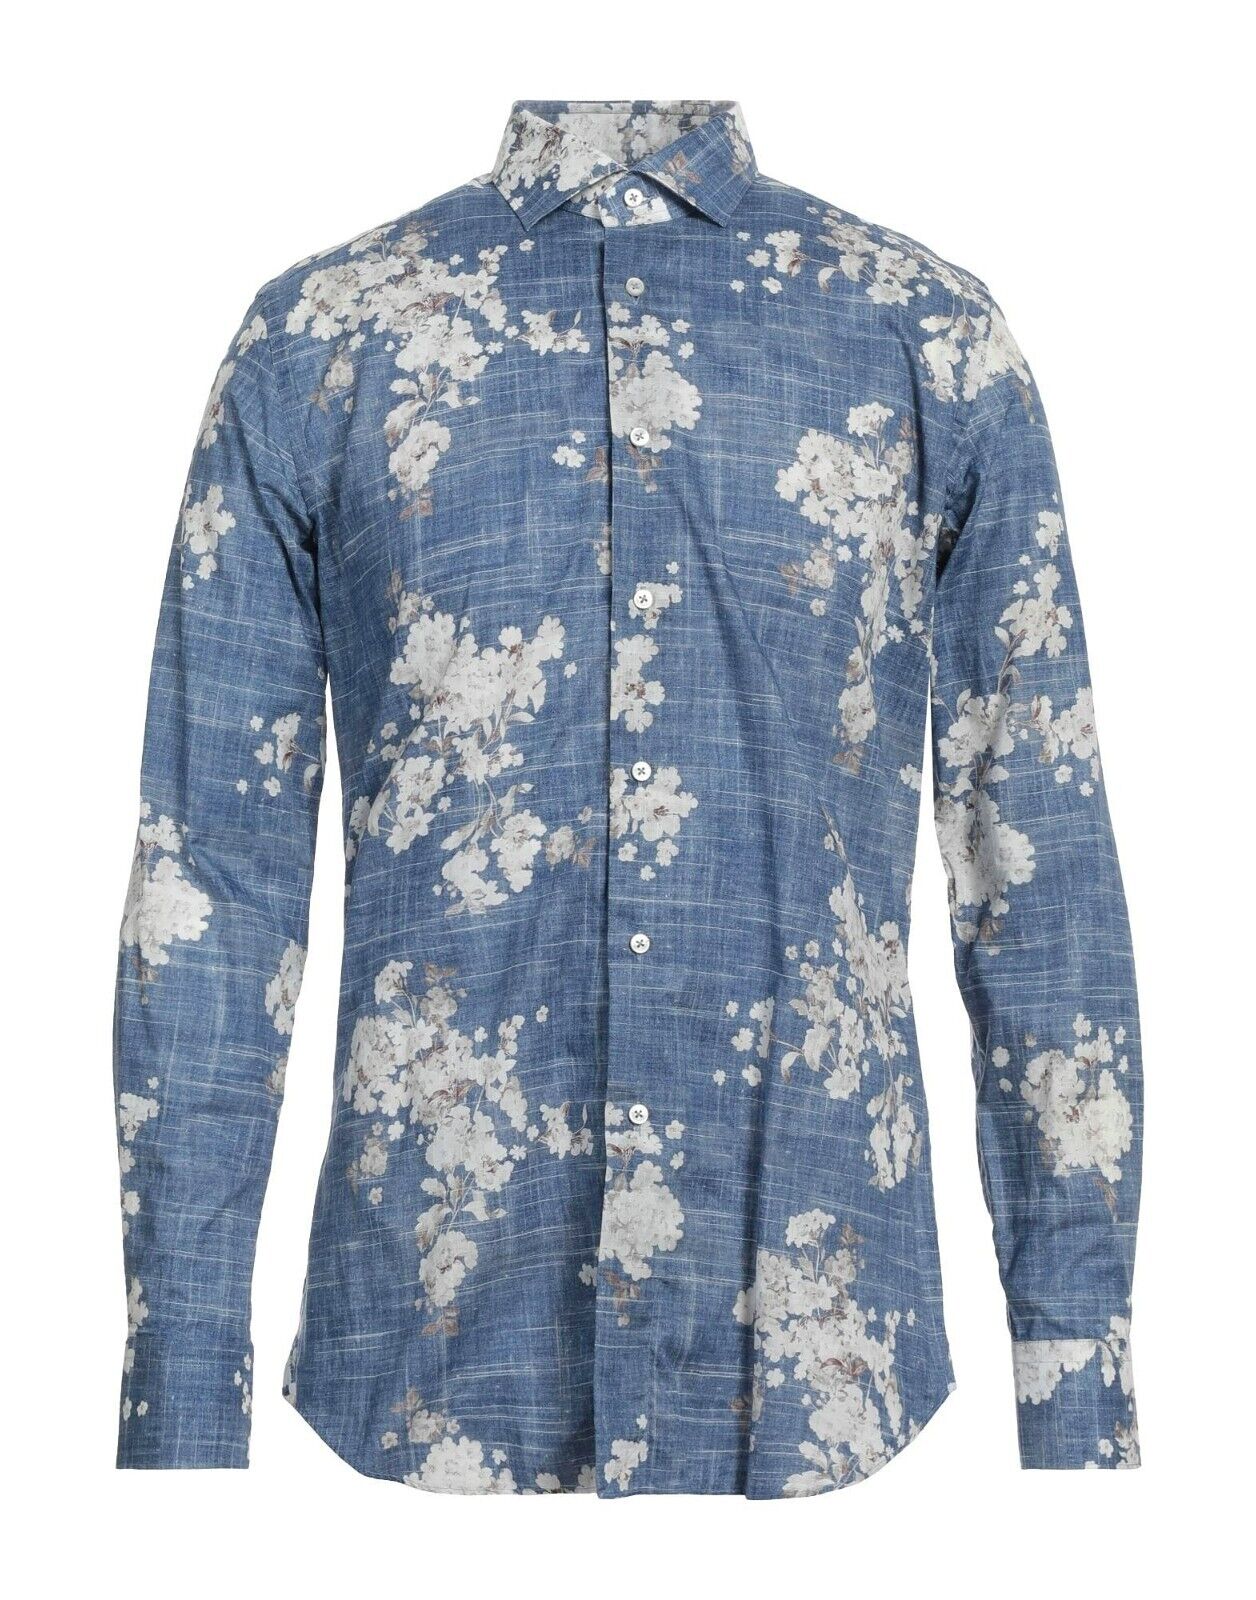 Image of CAMICIA HART&BROS FLORAL SLIM FIT - L / 16 SHIRT ROLL CUF BLUE PRINTED COTTON